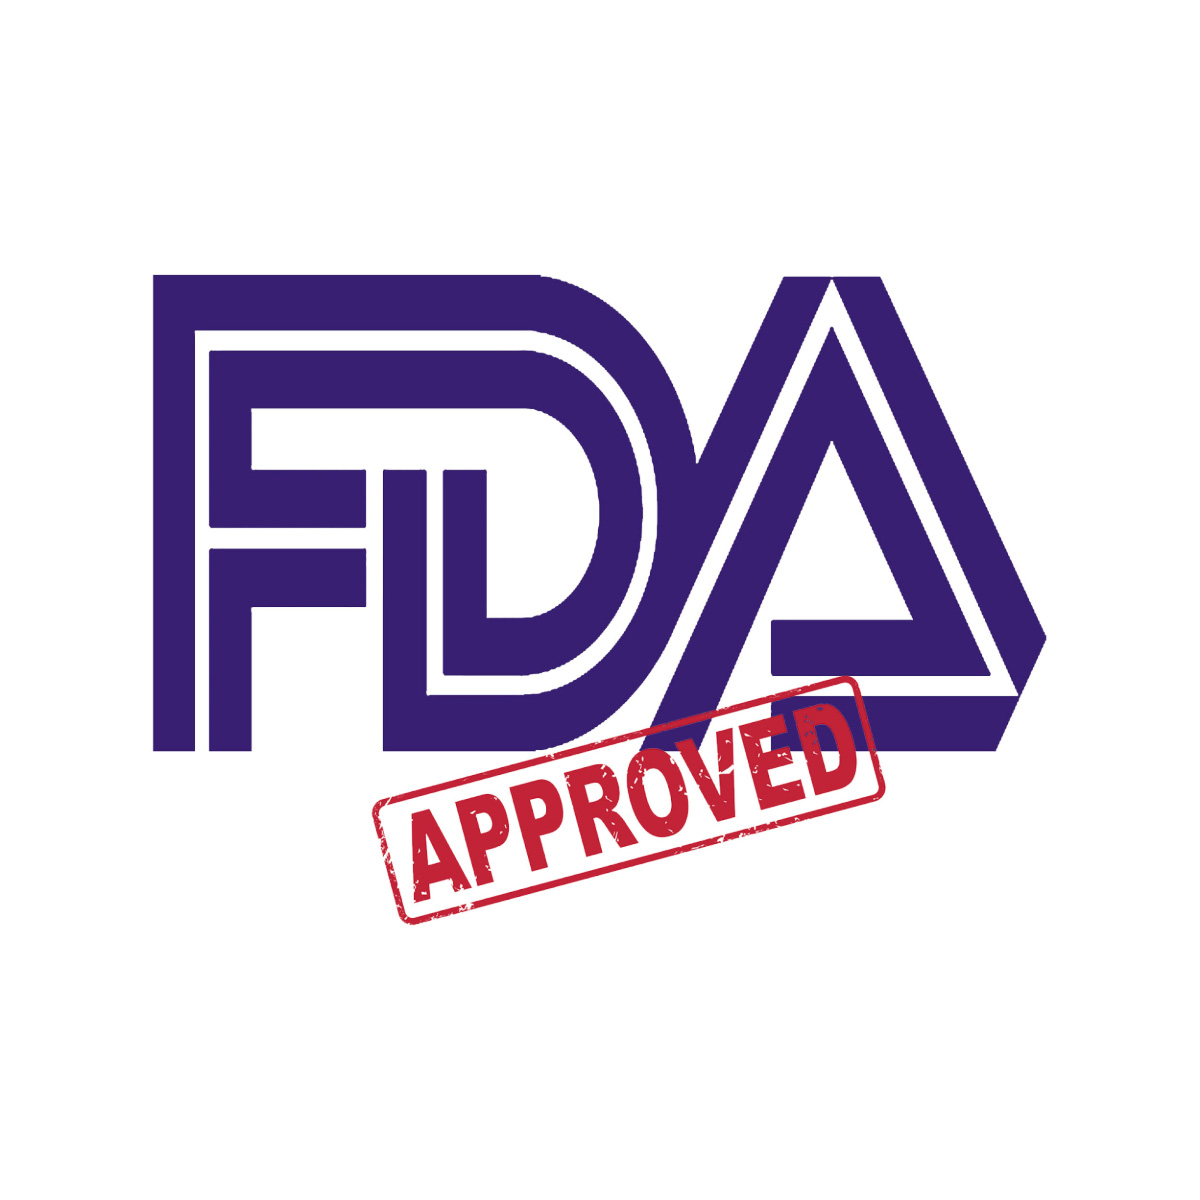 FDA Approves Genmab's and AbbVie's EPKINLY™ (epcoritamab-bysp) as the First and Only Bispecific Antibody to Treat Adults with Relapsed or Refractory (R/R) Diffuse Large B-cell Lymphoma (DLBCL)